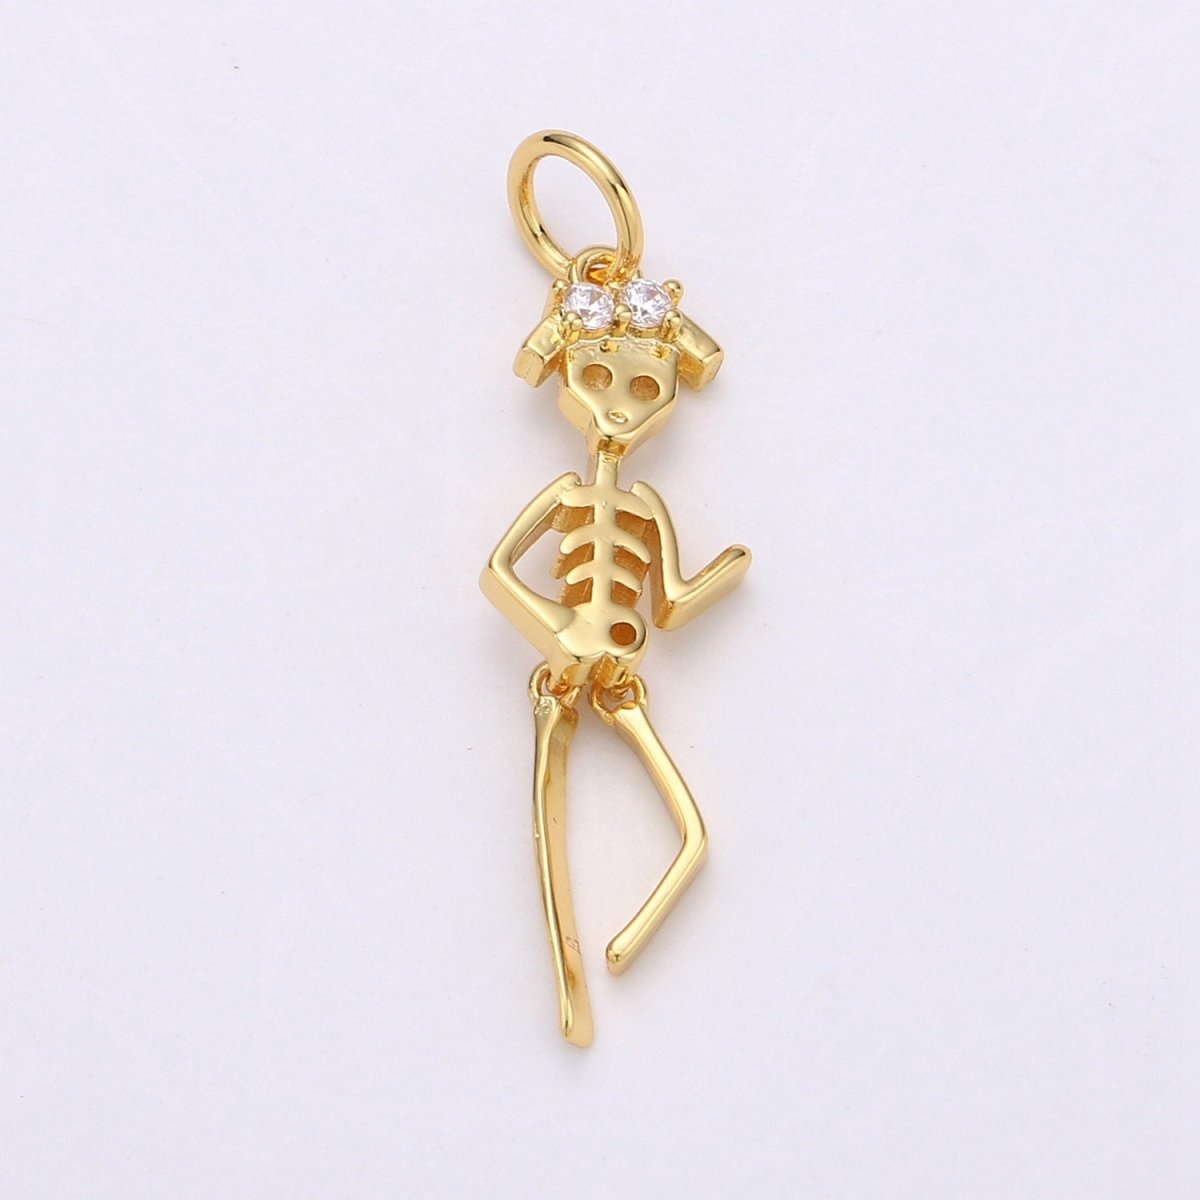 Day of the Dead Charm - Dia de los Muertos Pendant - Miniature Skeleton Gold Skull Charm for Halloween Necklace Jewelry Supply D-684 D-691 - DLUXCA